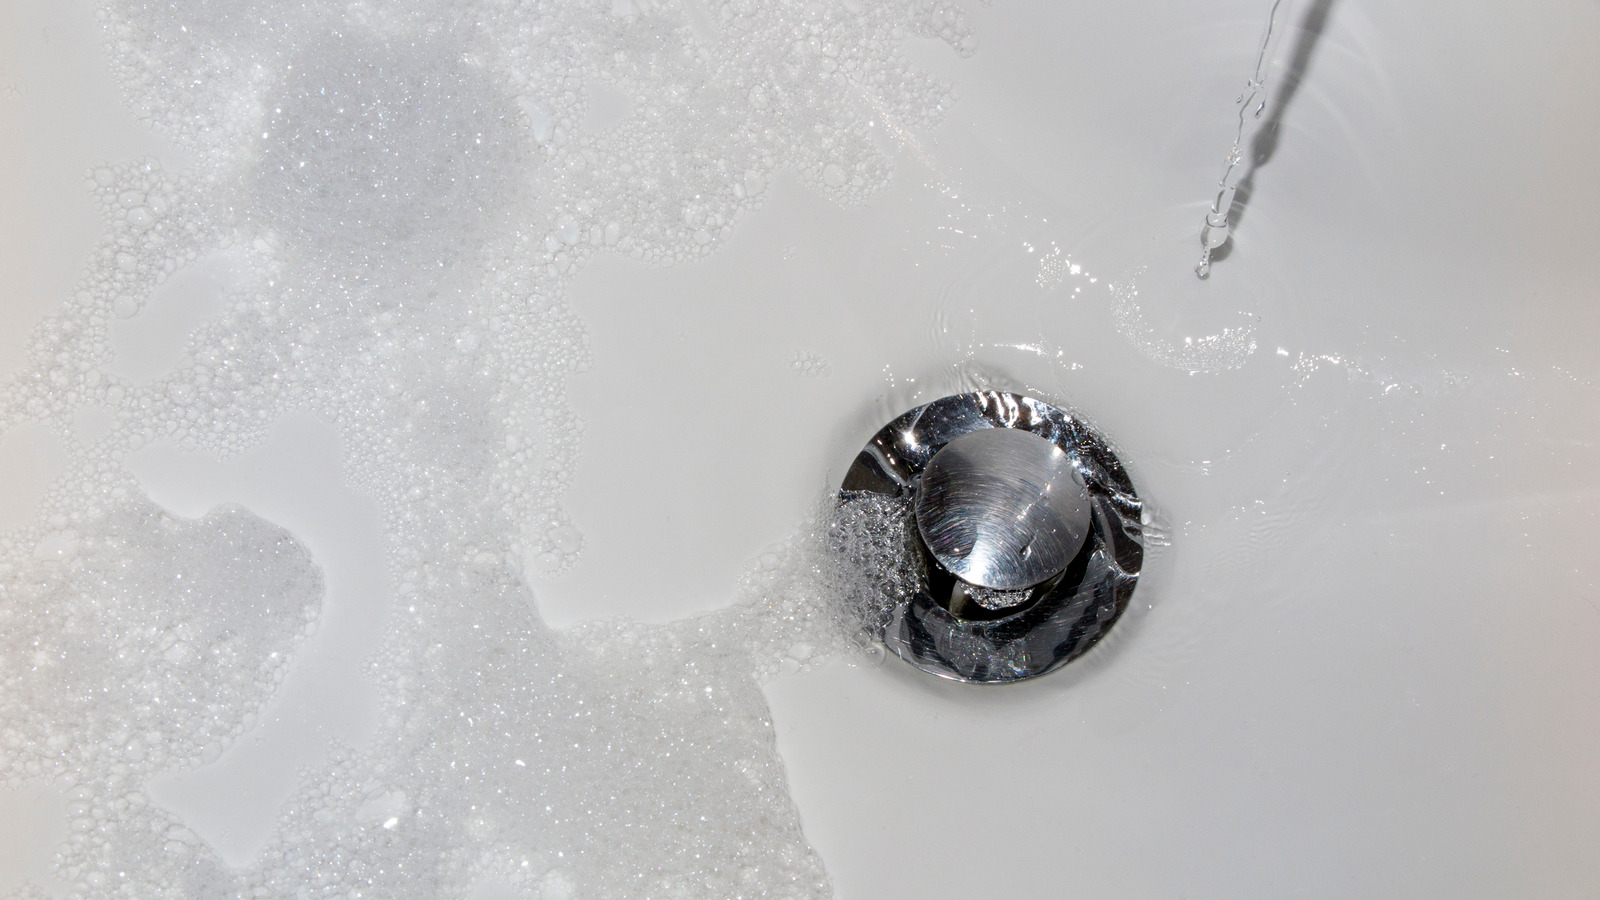 Clogged sink & drains? Here's how you fix it this monsoon! - WD40